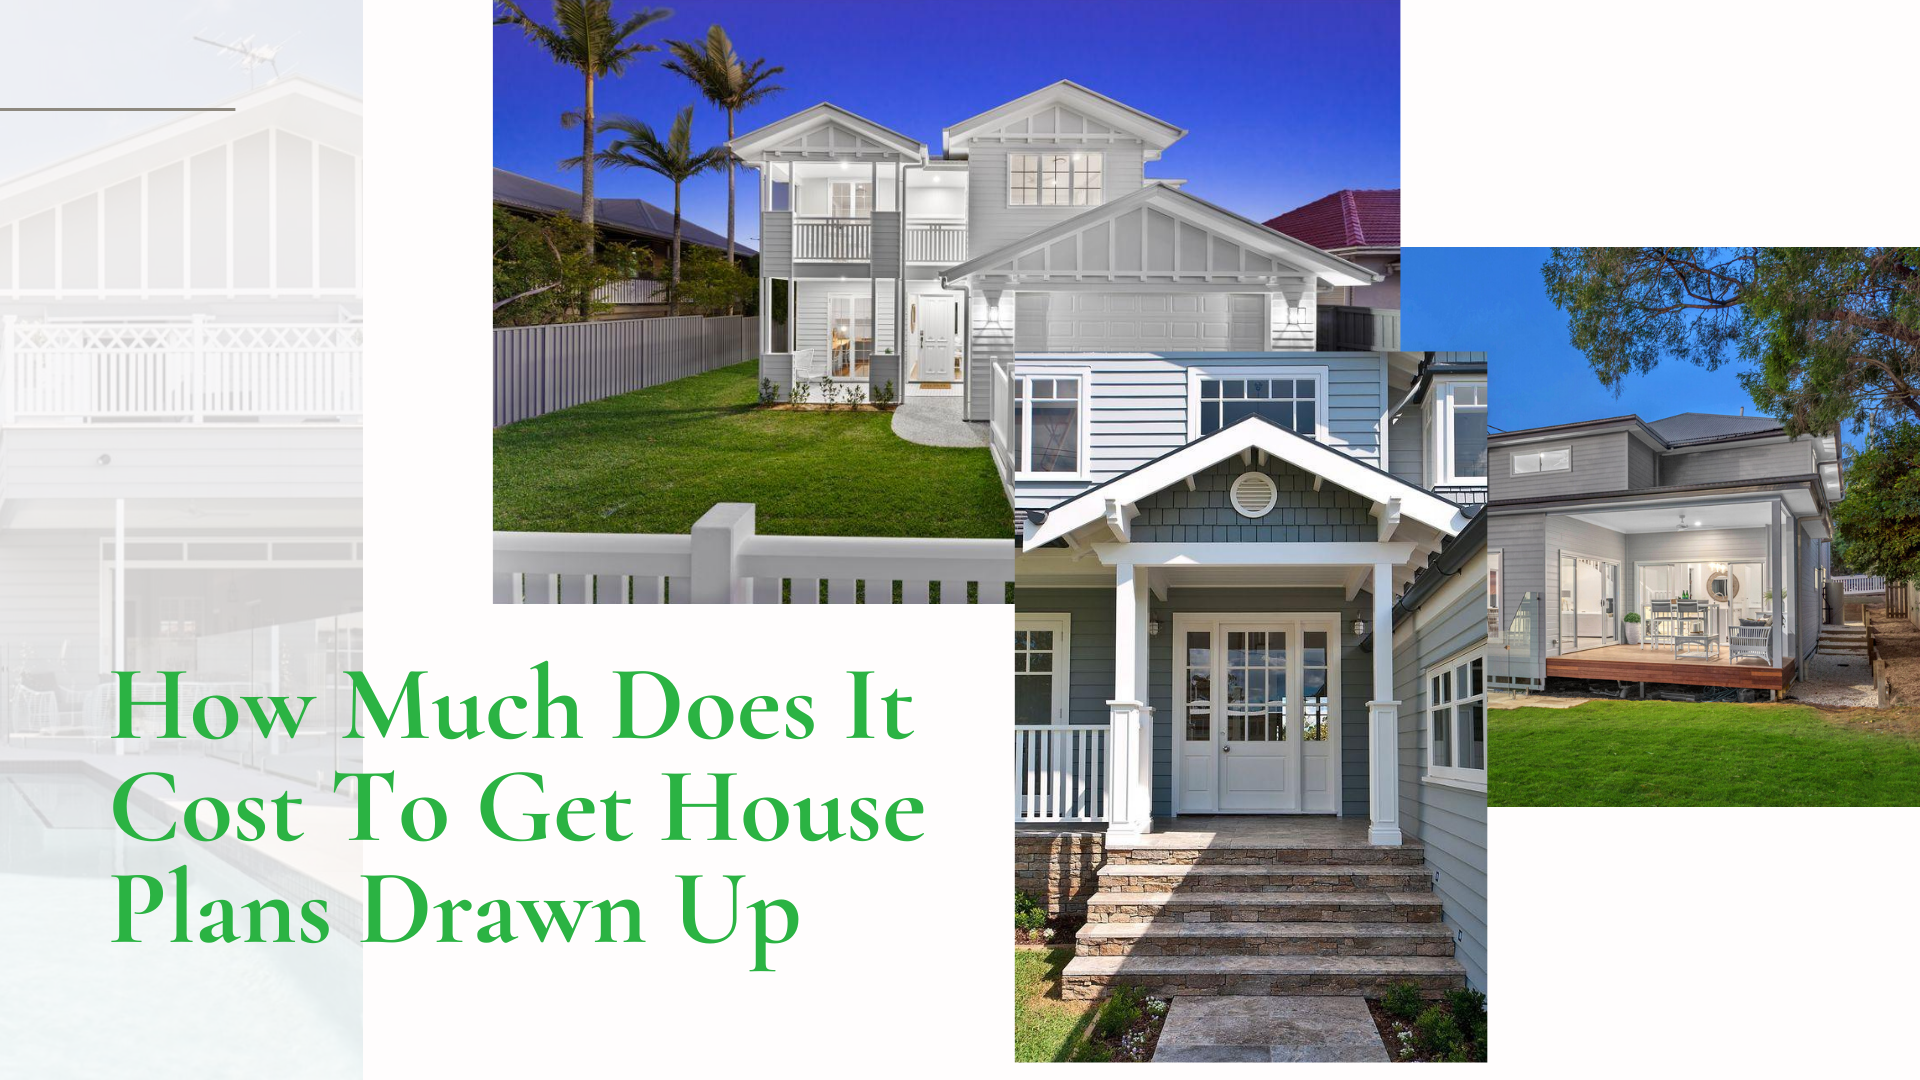 How Much Does It Cost To Get House Plans Drawn Up